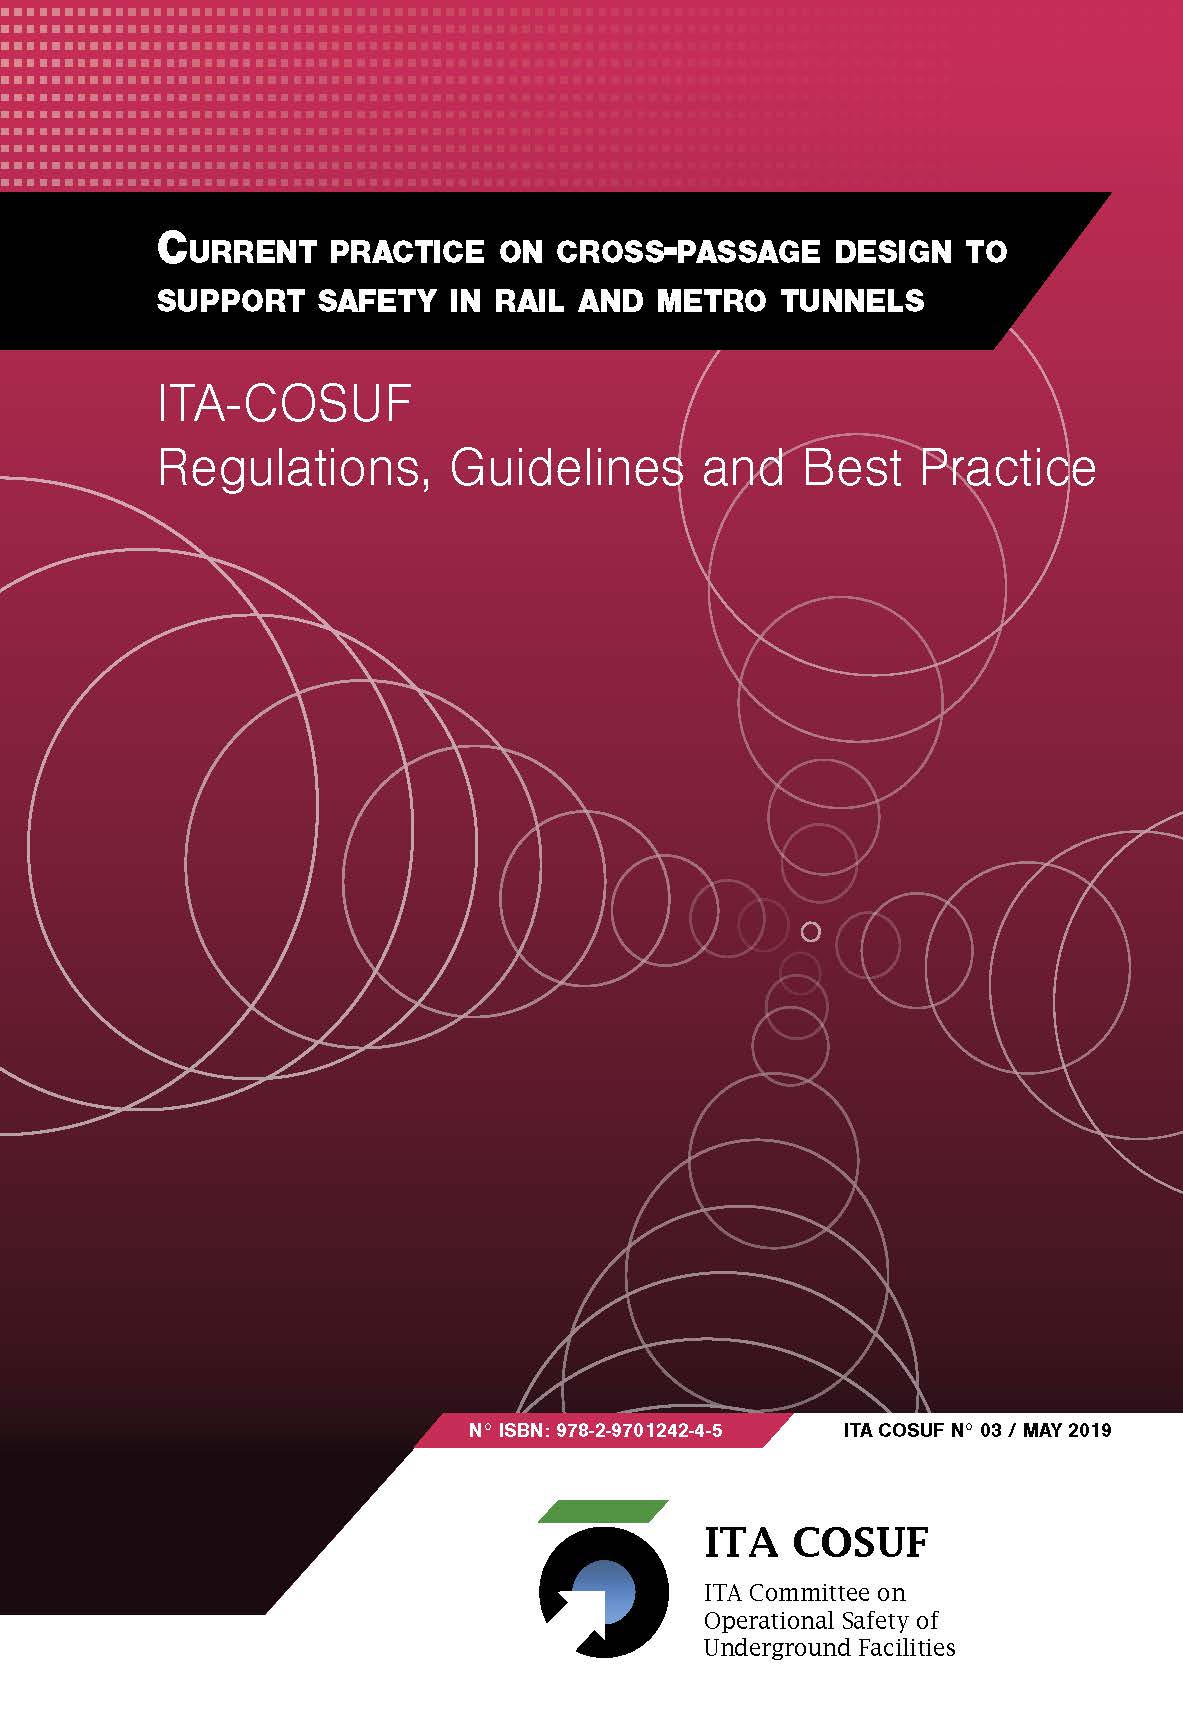 Current Practice on Cross-Passage Design to support Safety in Rail and Metro tunnels